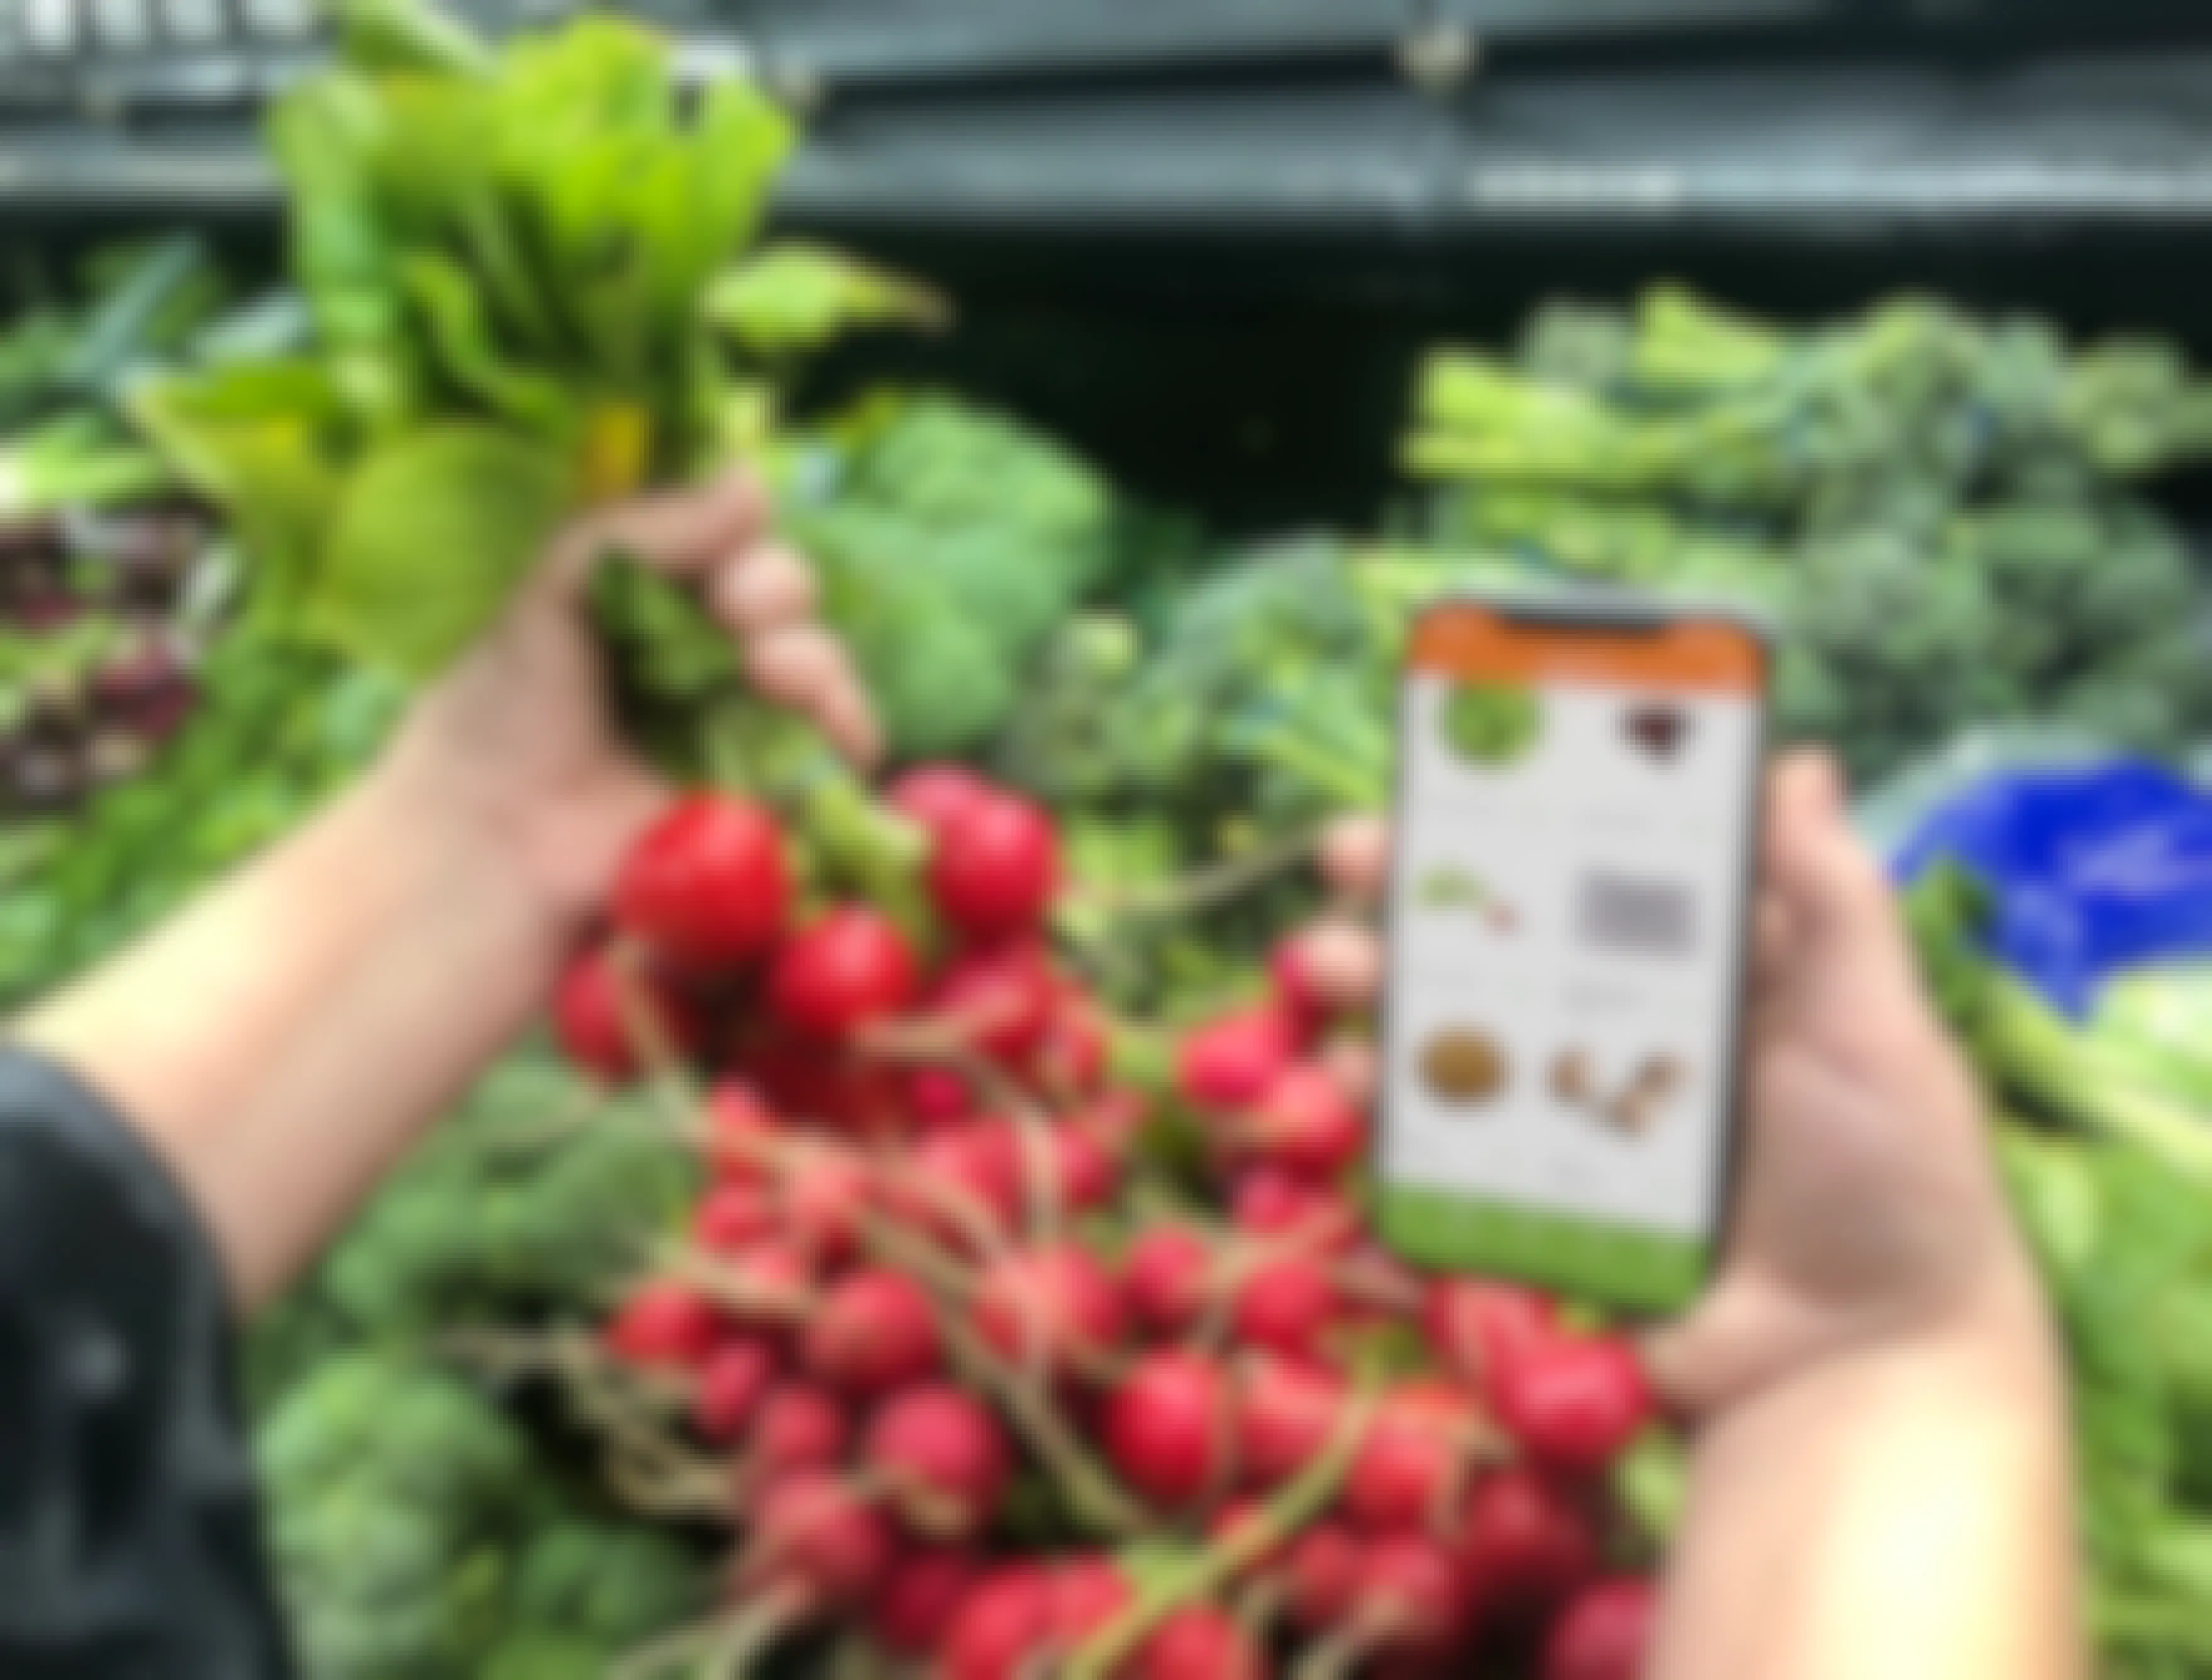 A woman holding a phone with the Makeena app in one hand and radishes in the other.